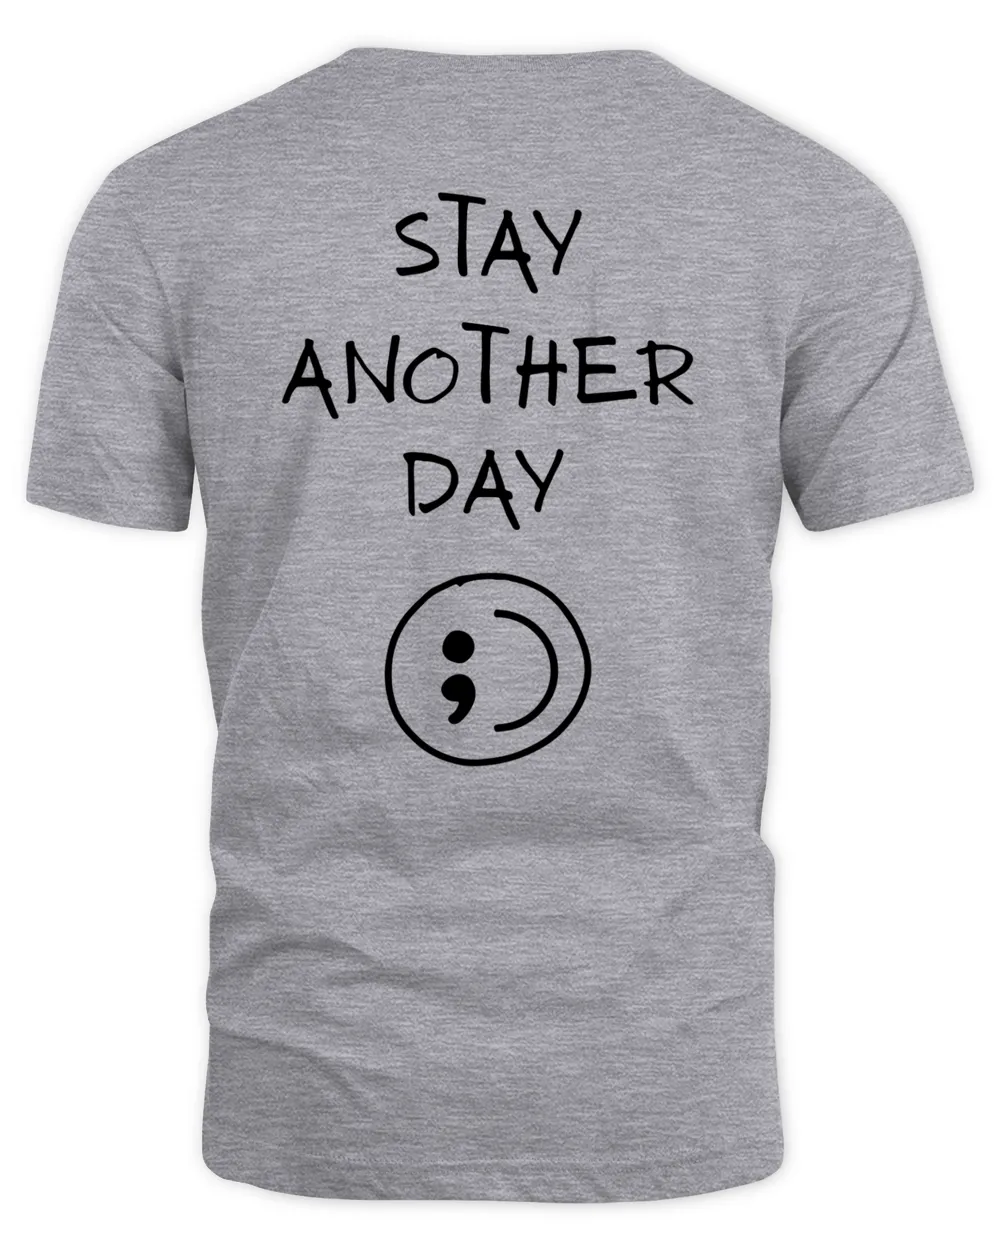 Stay Another Day Mental Health Awareness Tshirt